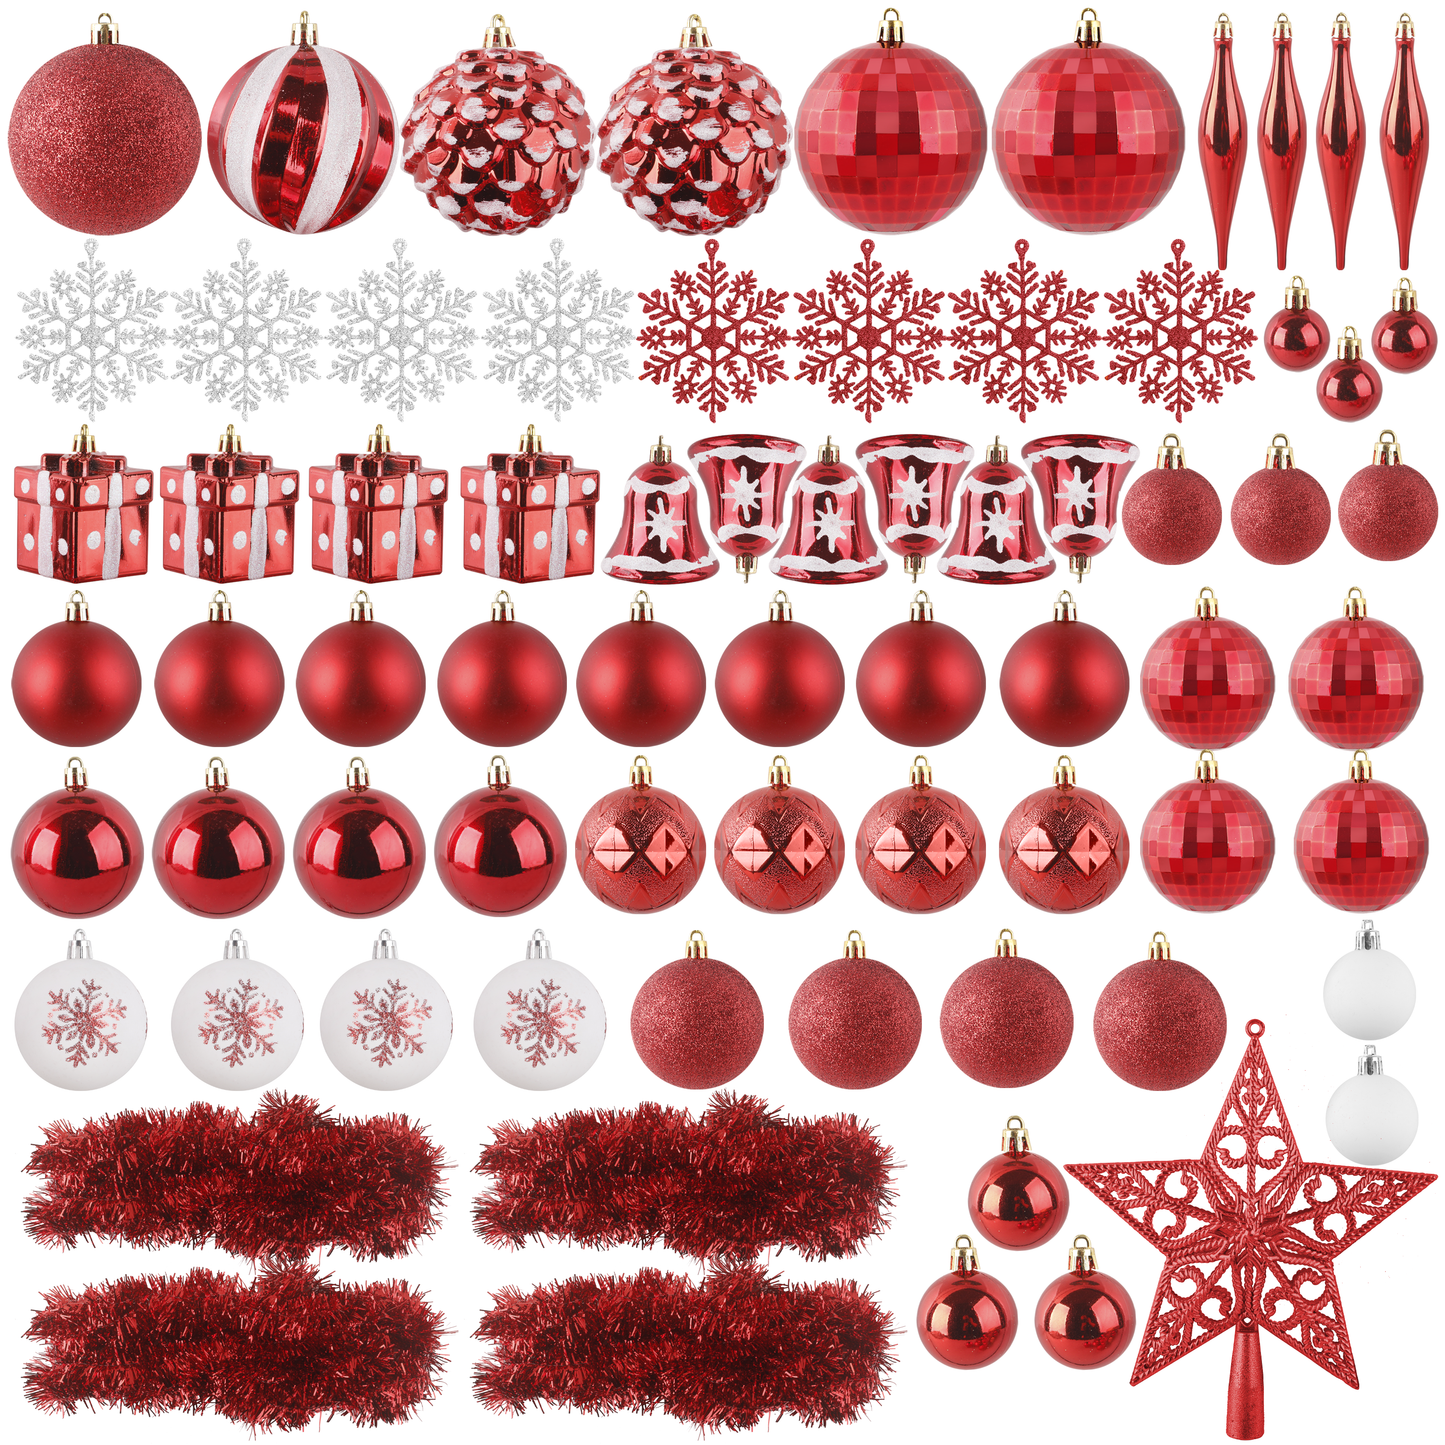 72ct Assorted Christmas Tree Ornaments - Red & White